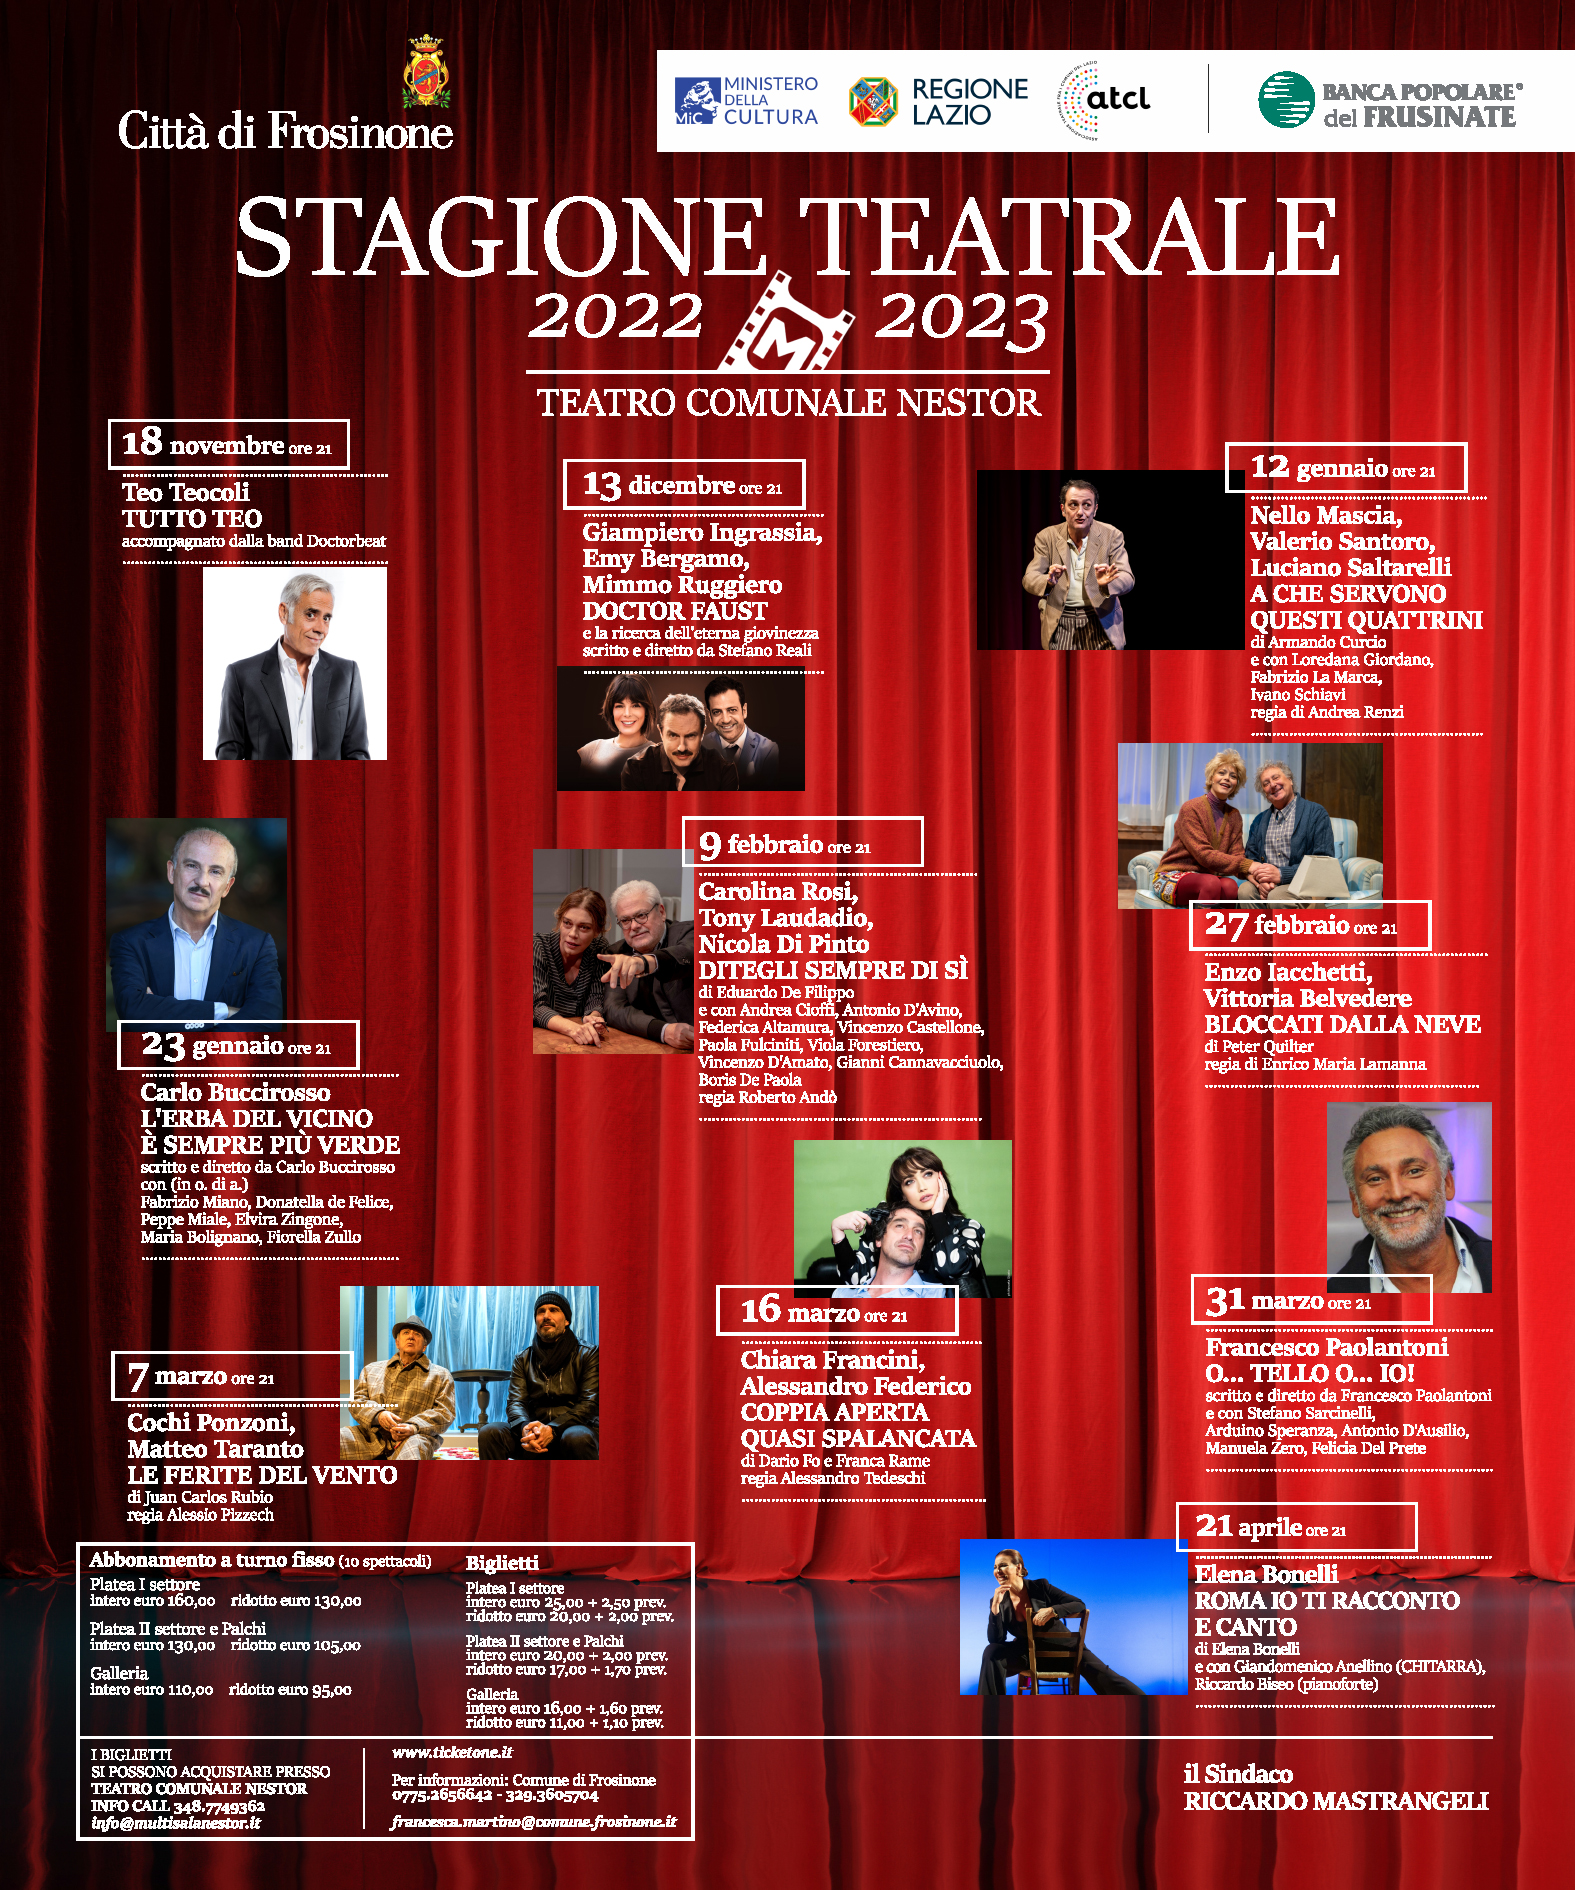 STAGIONE TEATRALE 2022-2023